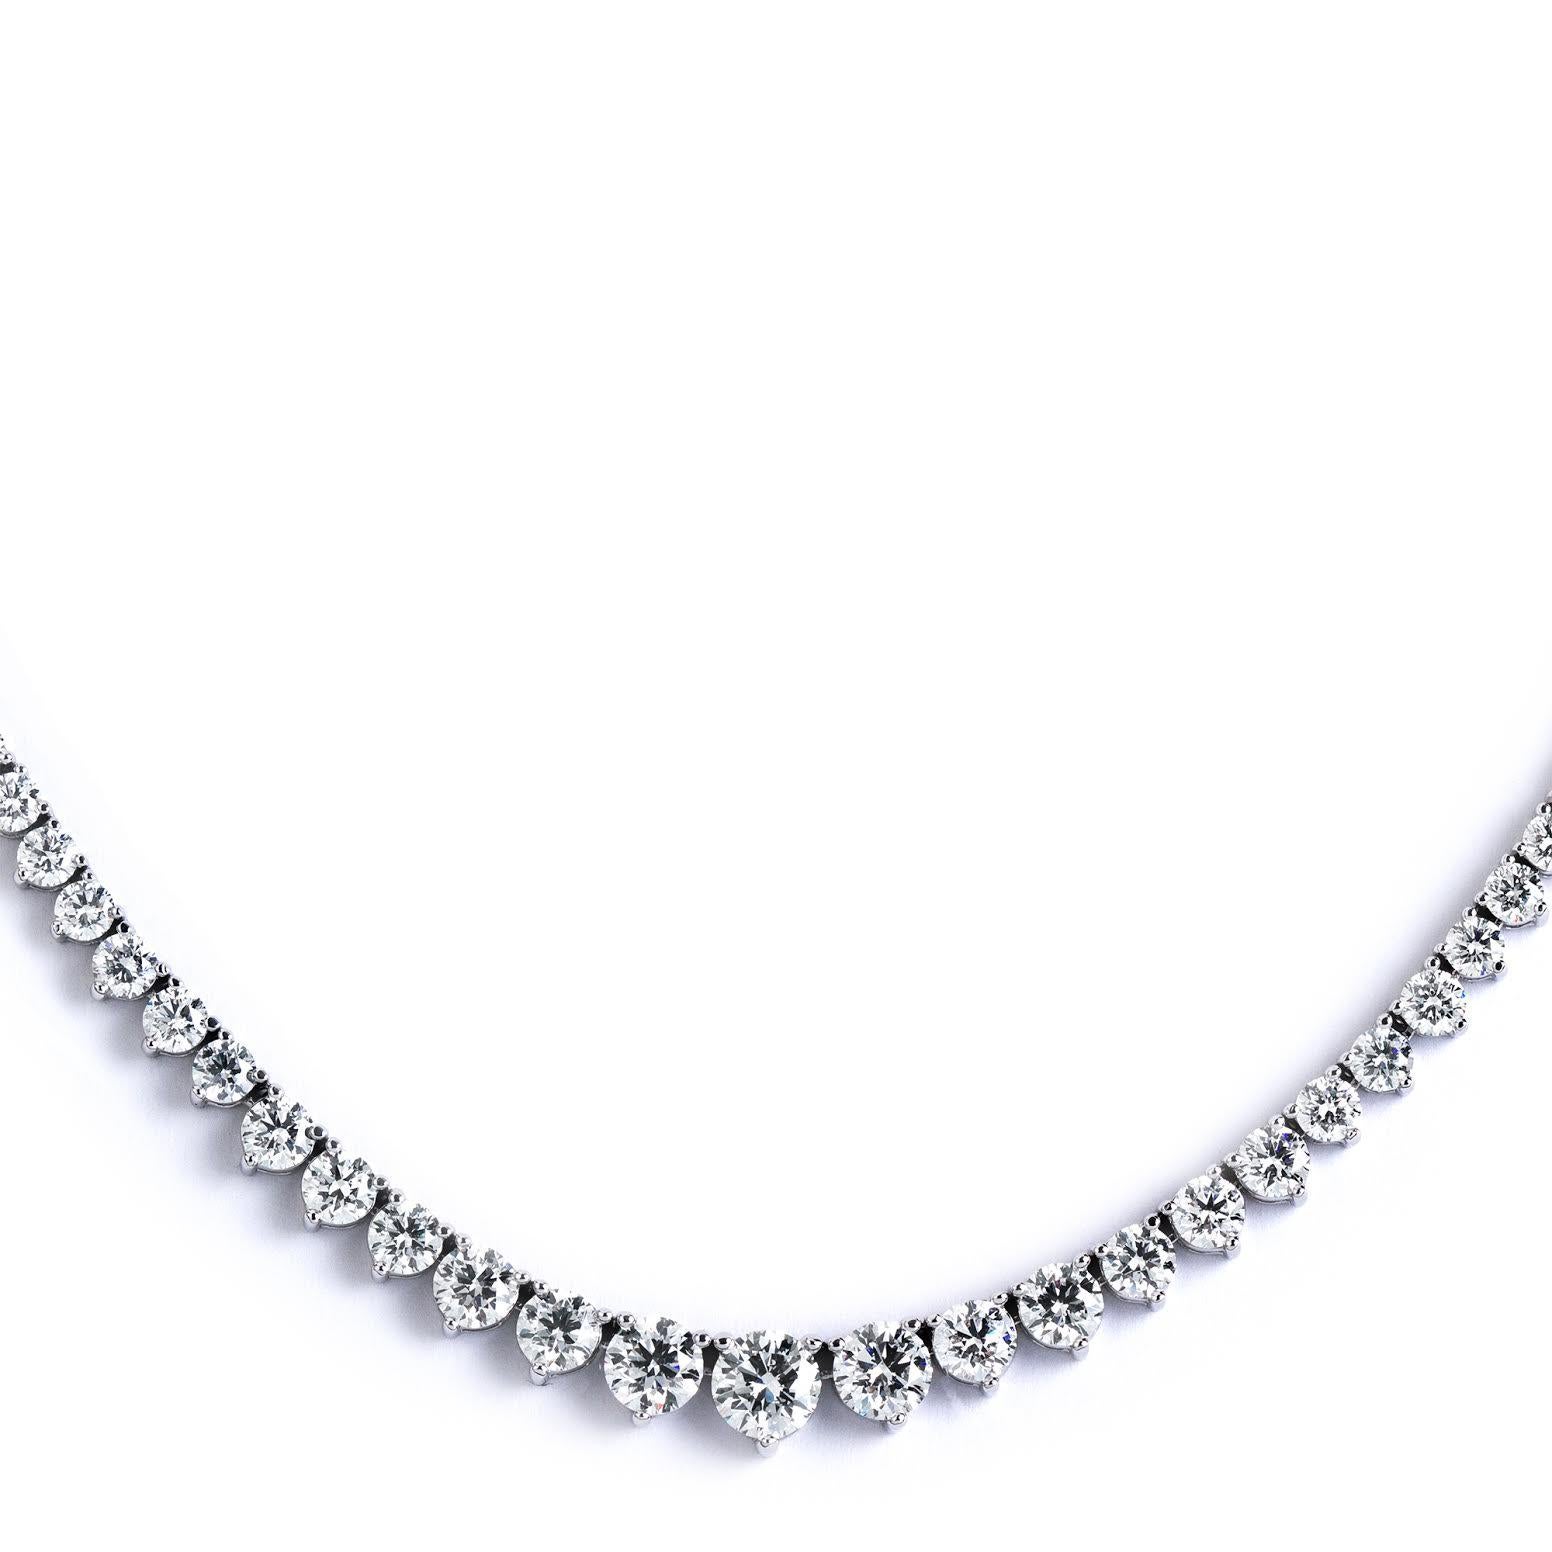 This exquisite graduated riviera necklace set in handmade 18k white gold featuring perfectly cut ideal round brilliant diamonds. the super white diamonds are in E-F color and VVS to VS clarity with a total carat weight of 10.11 This precious